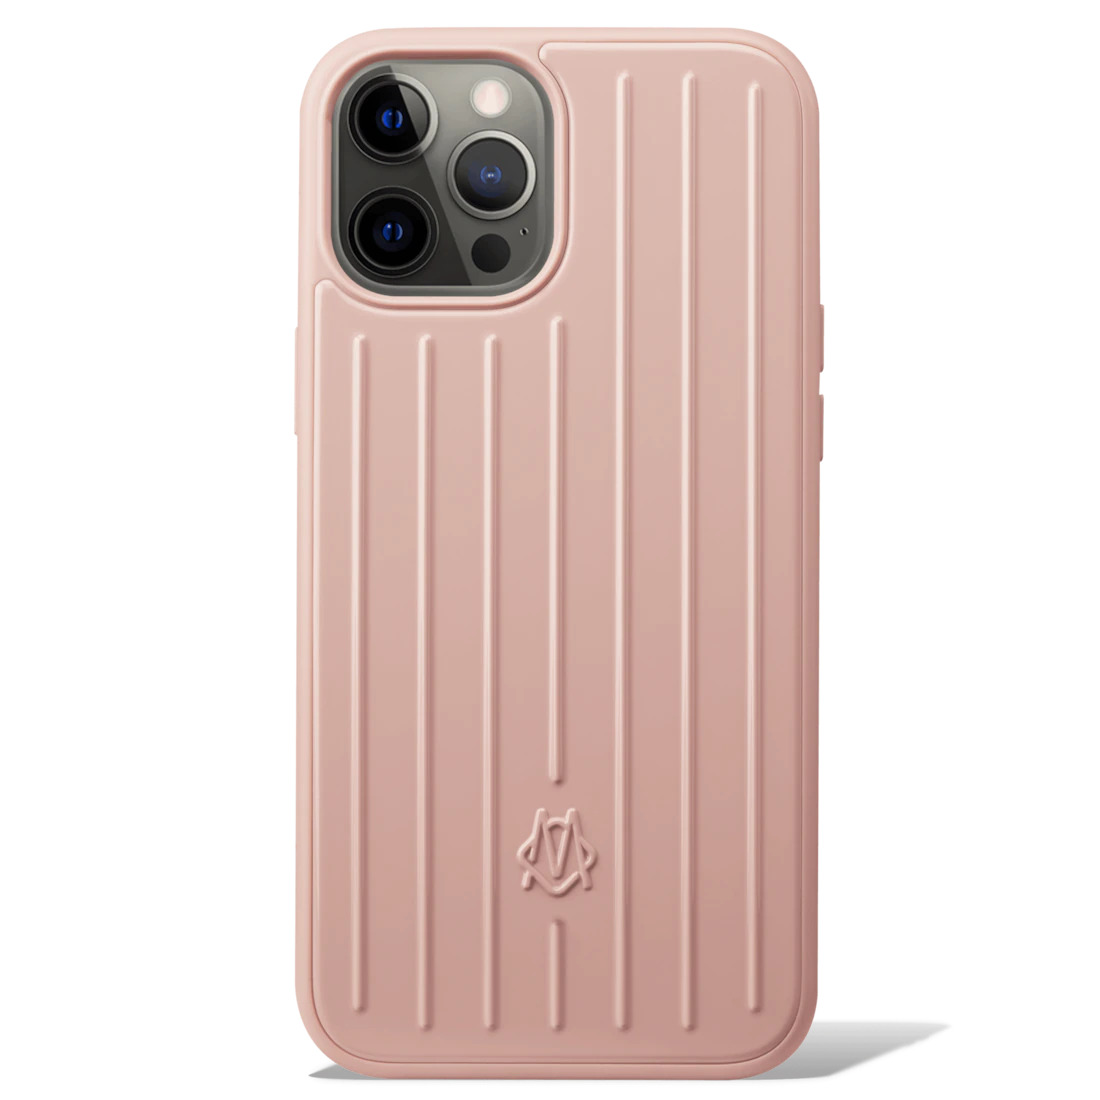 iPhone Accessories Desert Rose Pink Case for iPhone 12 Pro Max - 1